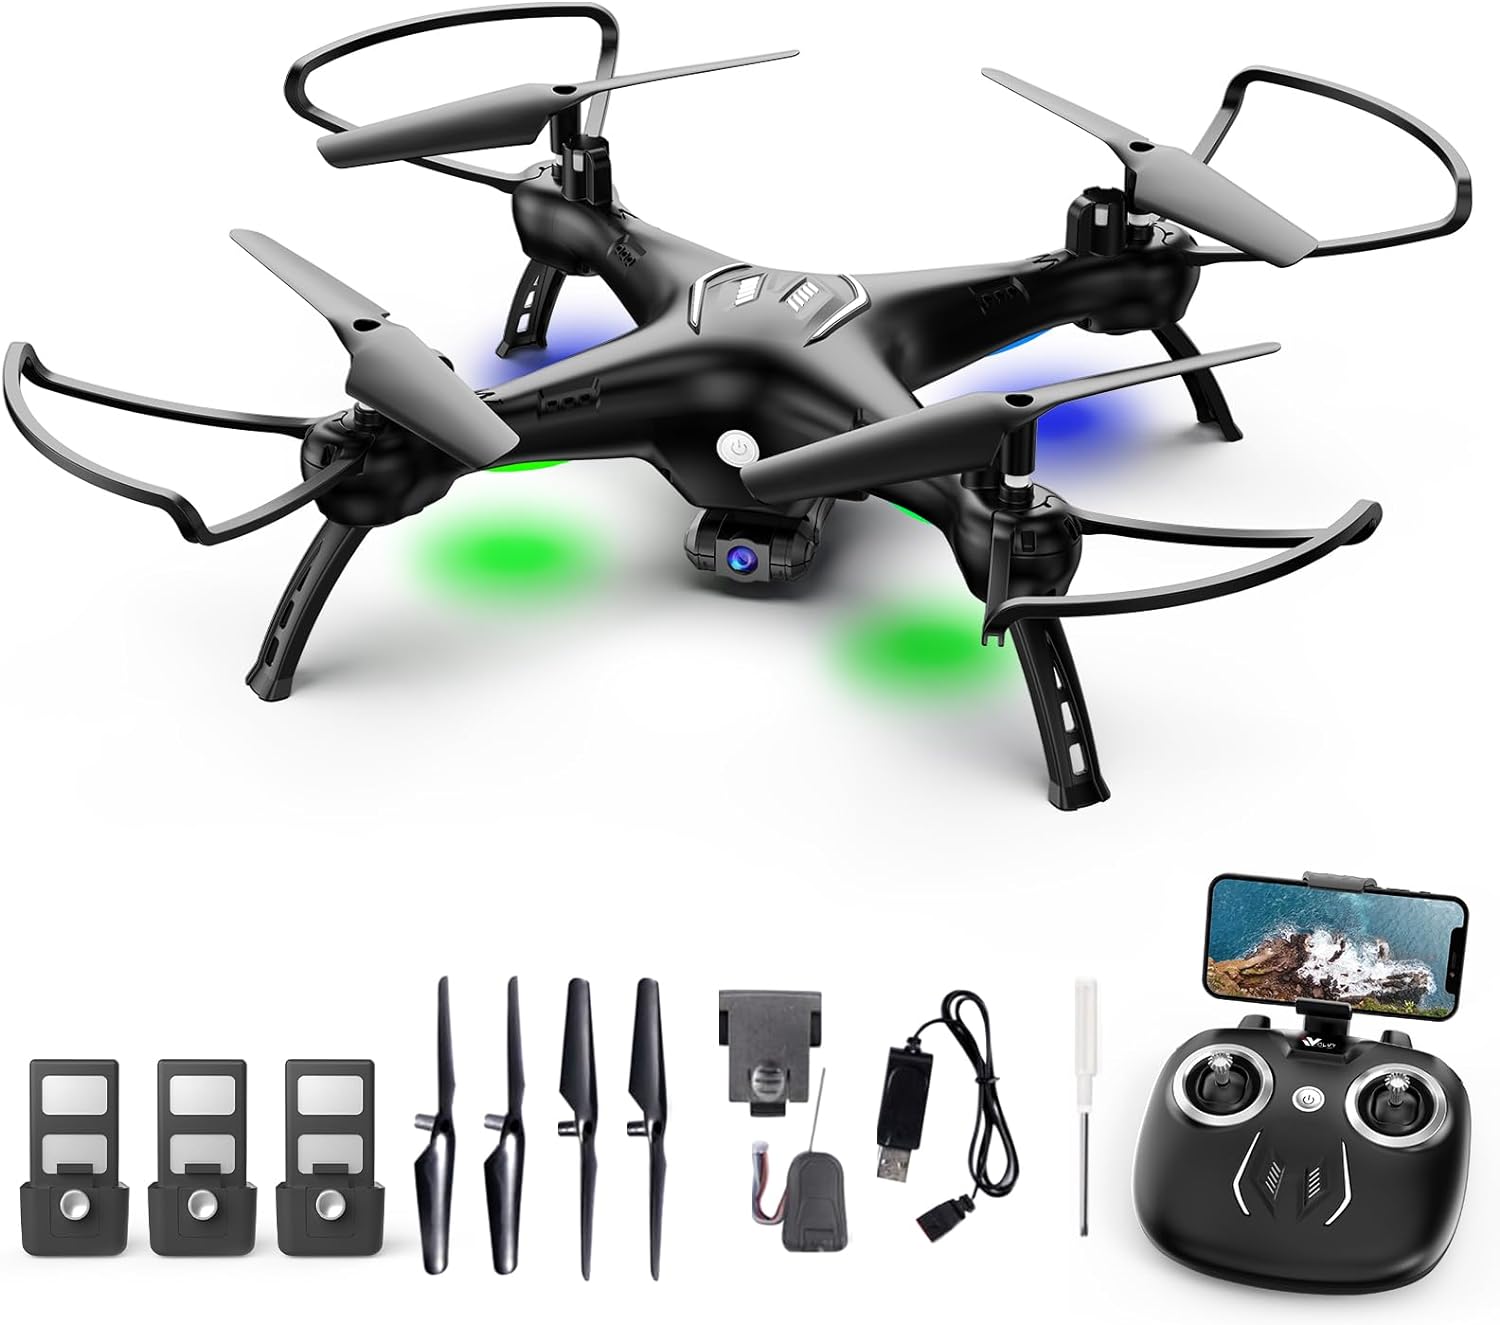 Drone with Camera for Adults/Kids/Beginners – ATTOP W10 1080P 120° FPV Live Video Drone, Beginner Friendly with 1 Key Fly/Land/Return, 360° Flip, APP/Remote/Voice/Gesture/Gravity Control, Camera Drone for Kids 8-12 w/ Safe Emergency Stop, 20 Mins Flight, No FAA License Required, Halloween Toys